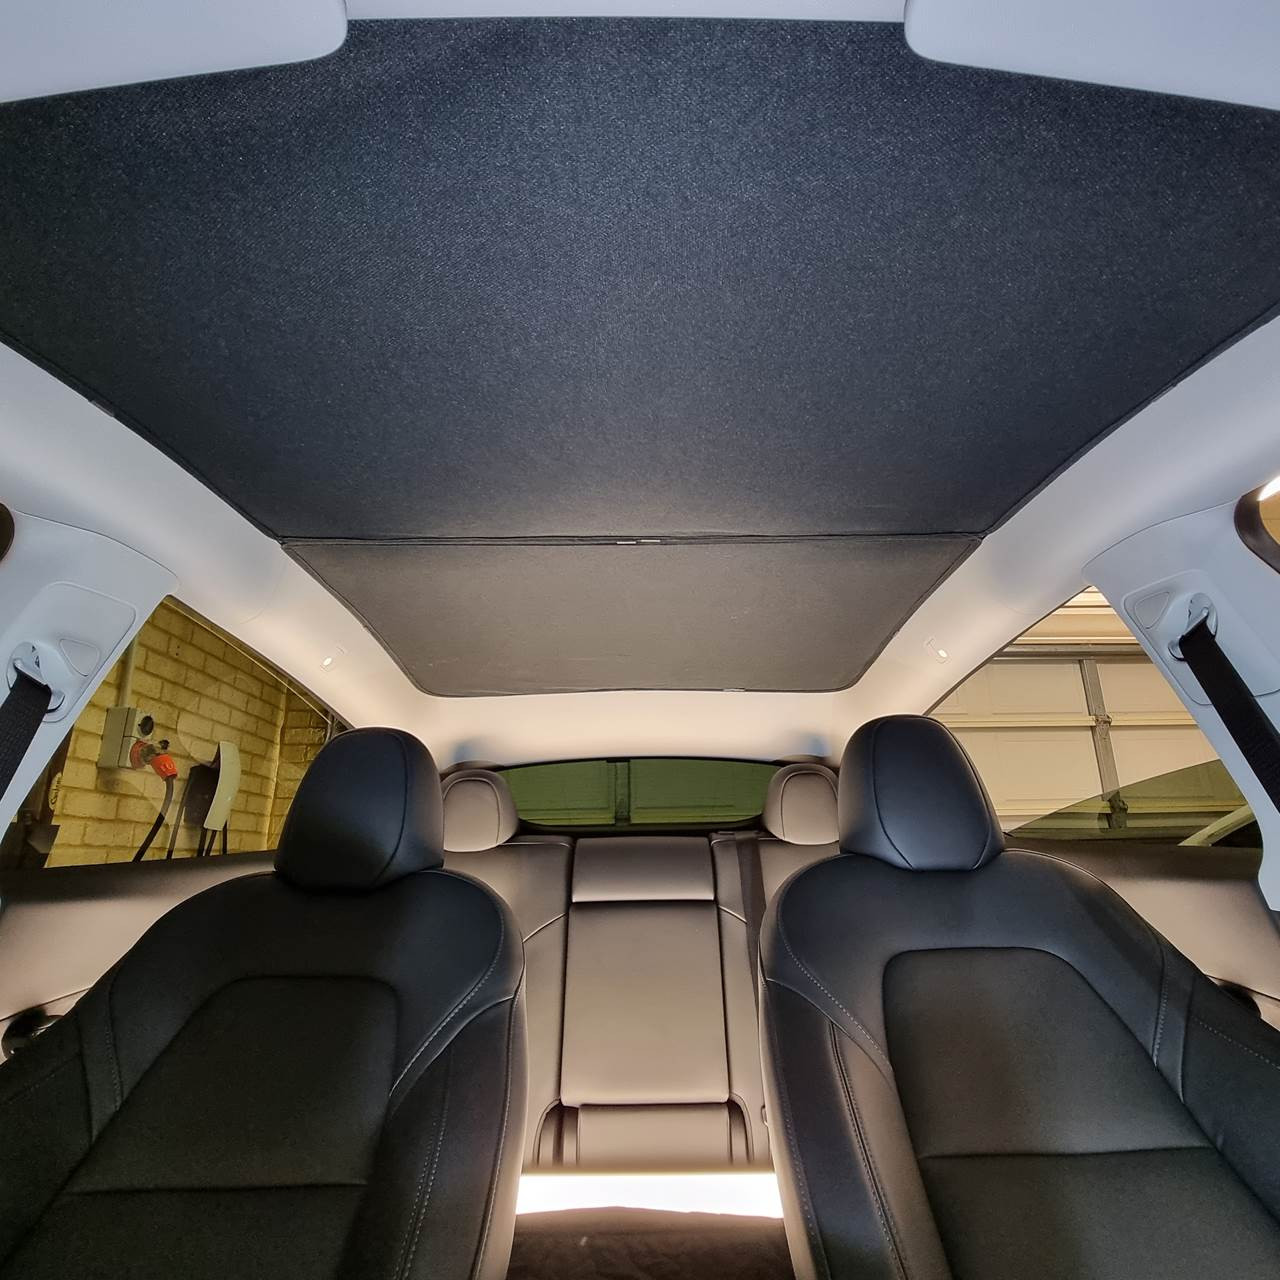 Tesla Model Y Sunroof shades. Split in 2 sections, reflective silver